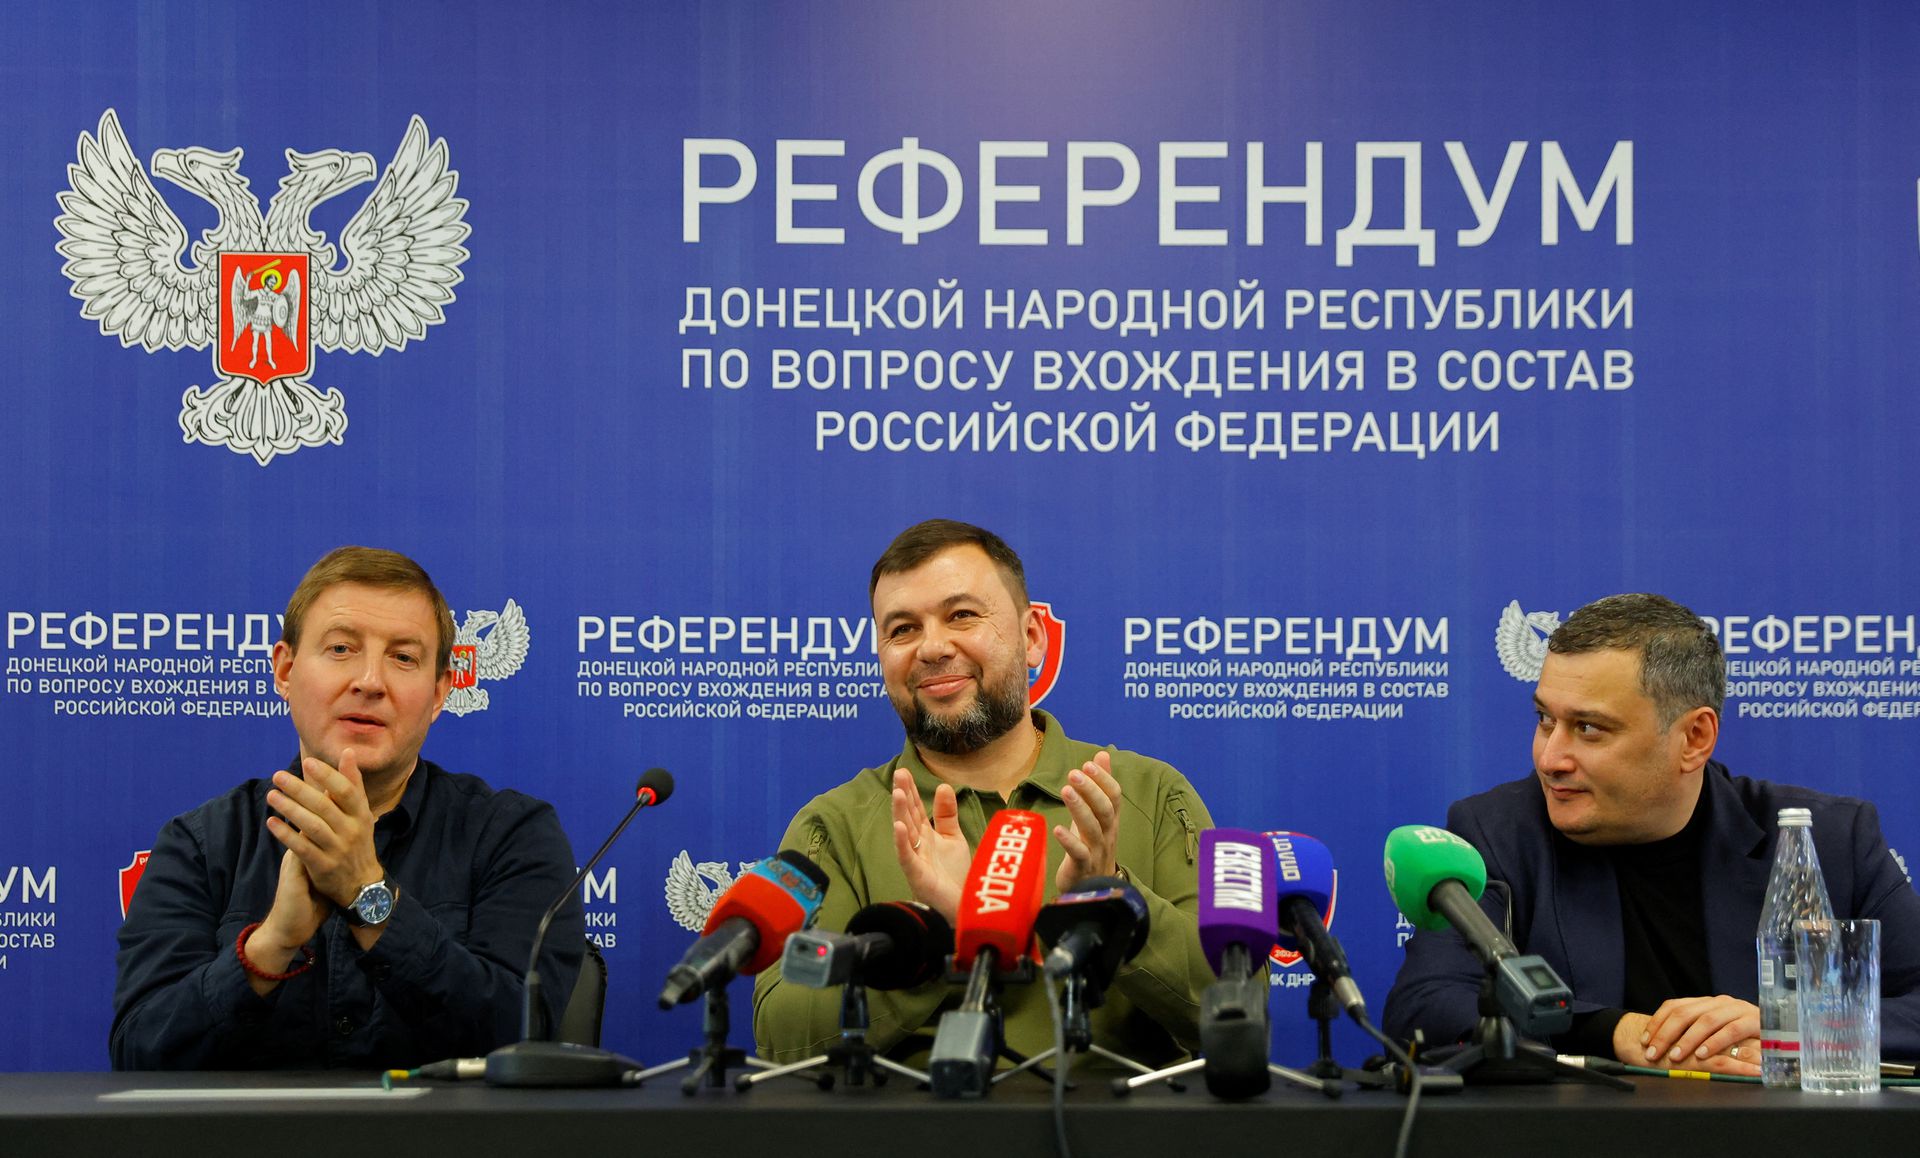 Head of the separatist self-proclaimed Donetsk People's Republic Denis Pushilin, Chairman of the Committee of Russia's State Duma on Information Policy, Information Technology and Communications Aleksandr Khinshtein and Secretary of the United Russia Party's General Council Andrey Turchak attend a news conference on preliminary results of a referendum on the joining of the self-proclaimed Donetsk People's Republic (DPR) to Russia, in Donetsk, Ukraine September 27, 2022. REUTERS/Alexander Ermochenko